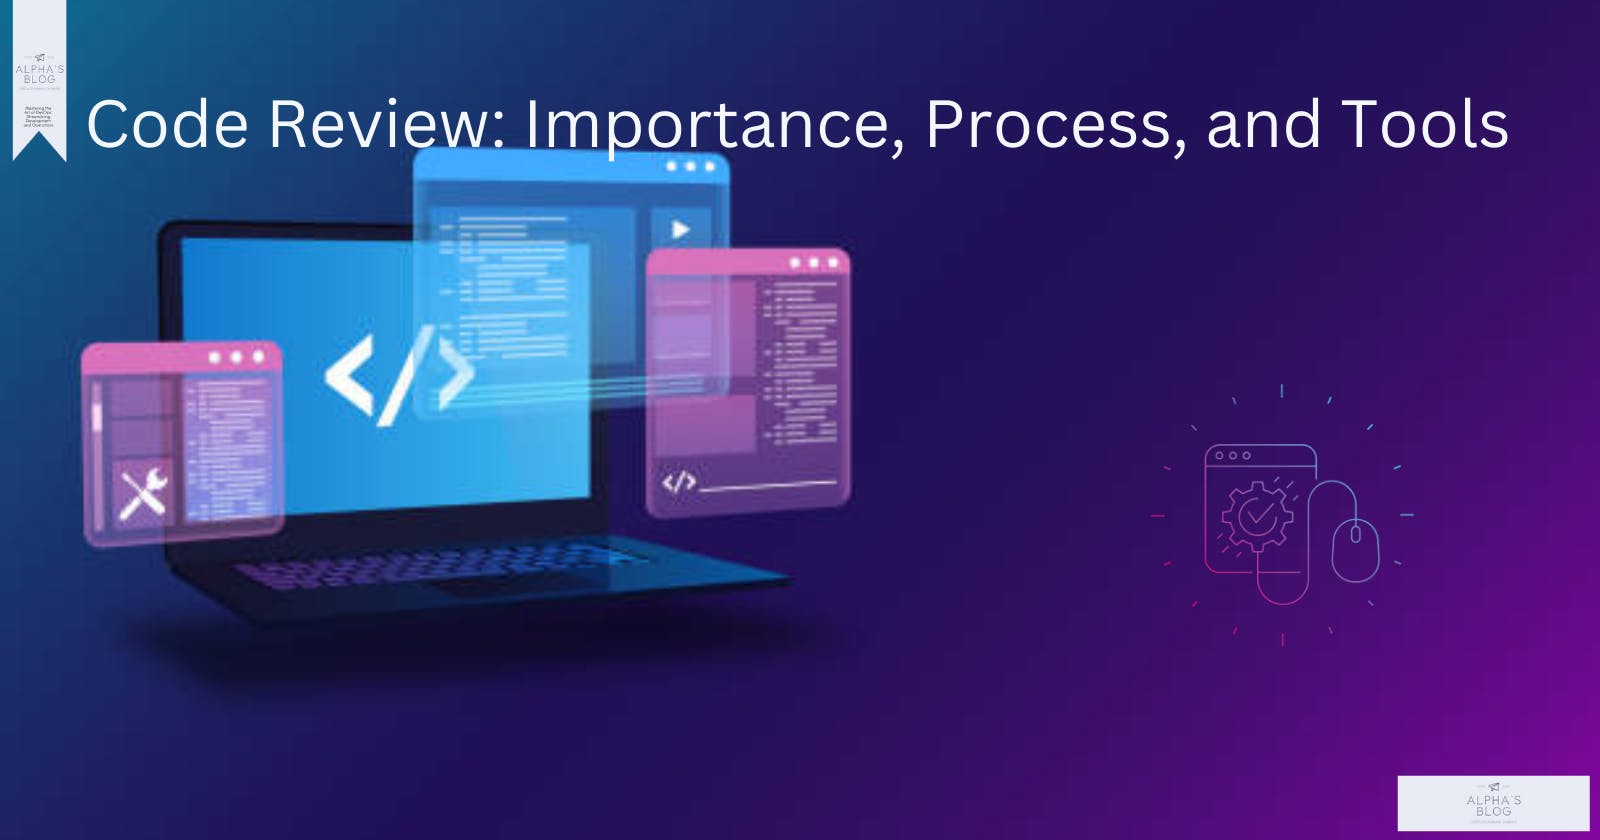 Code Review: Importance, Process, and Tools